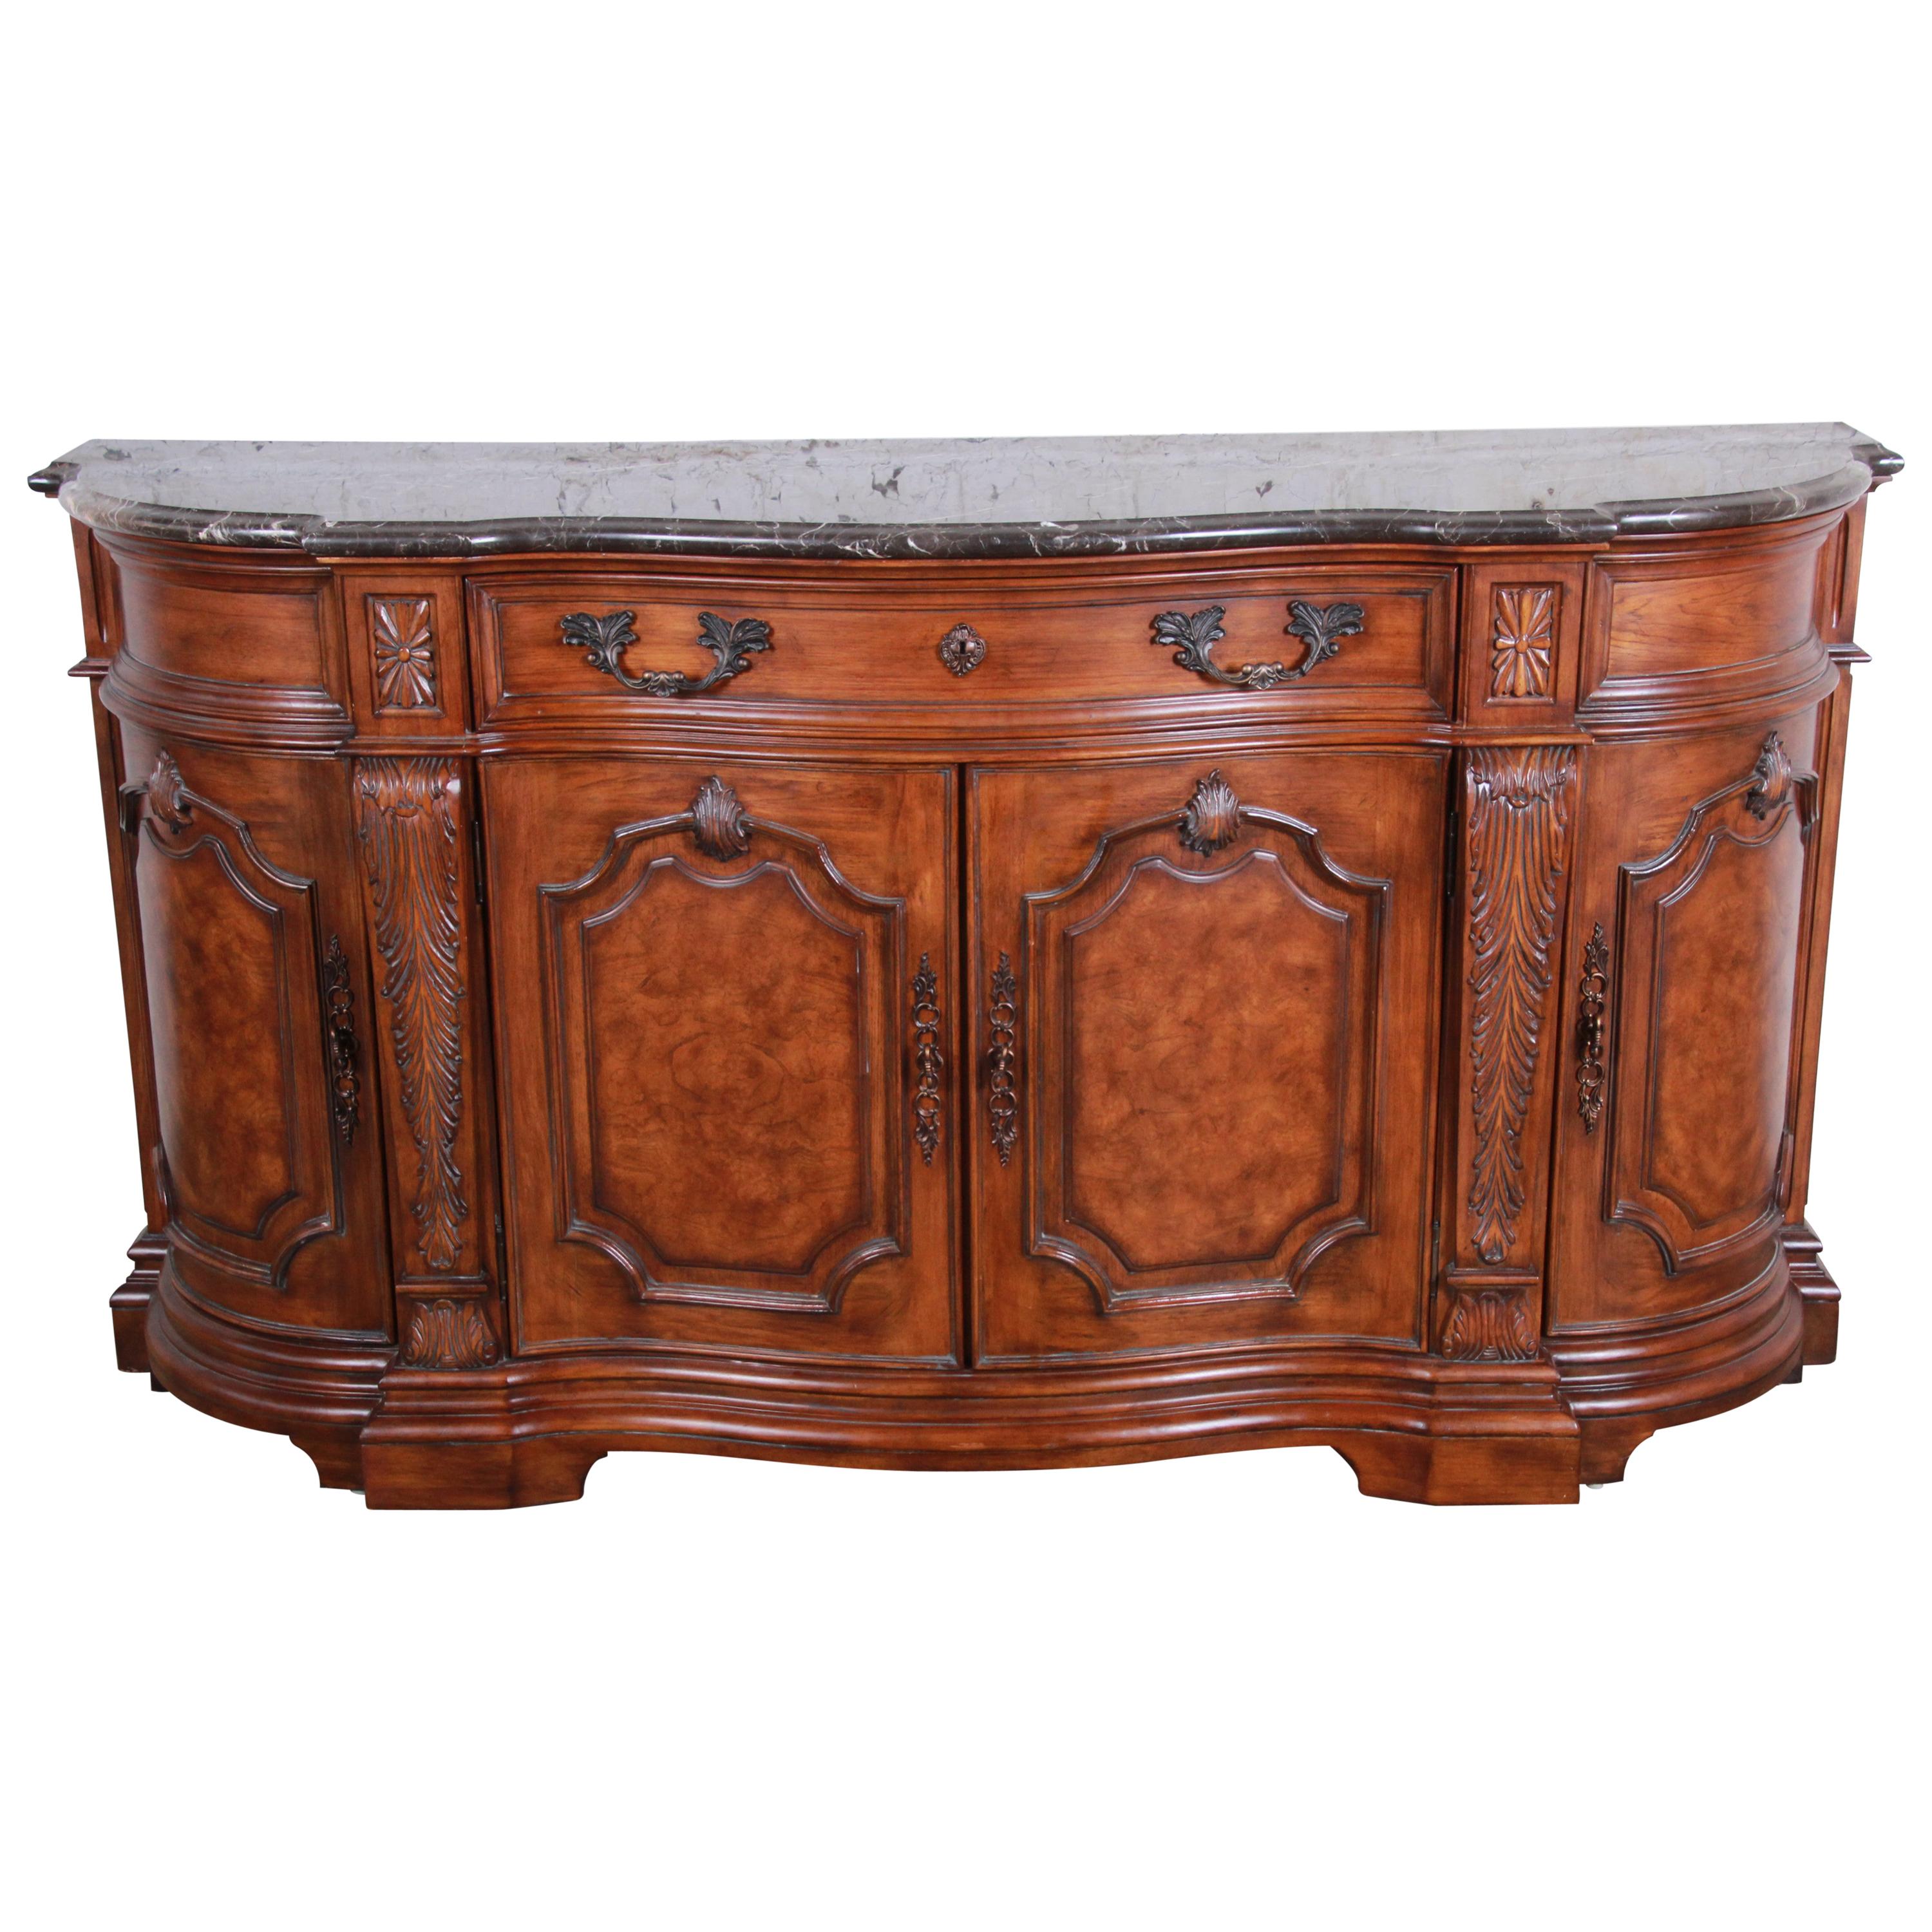 Drexel Heritage French Carved Burled Walnut Marble-Top Sideboard Credenza